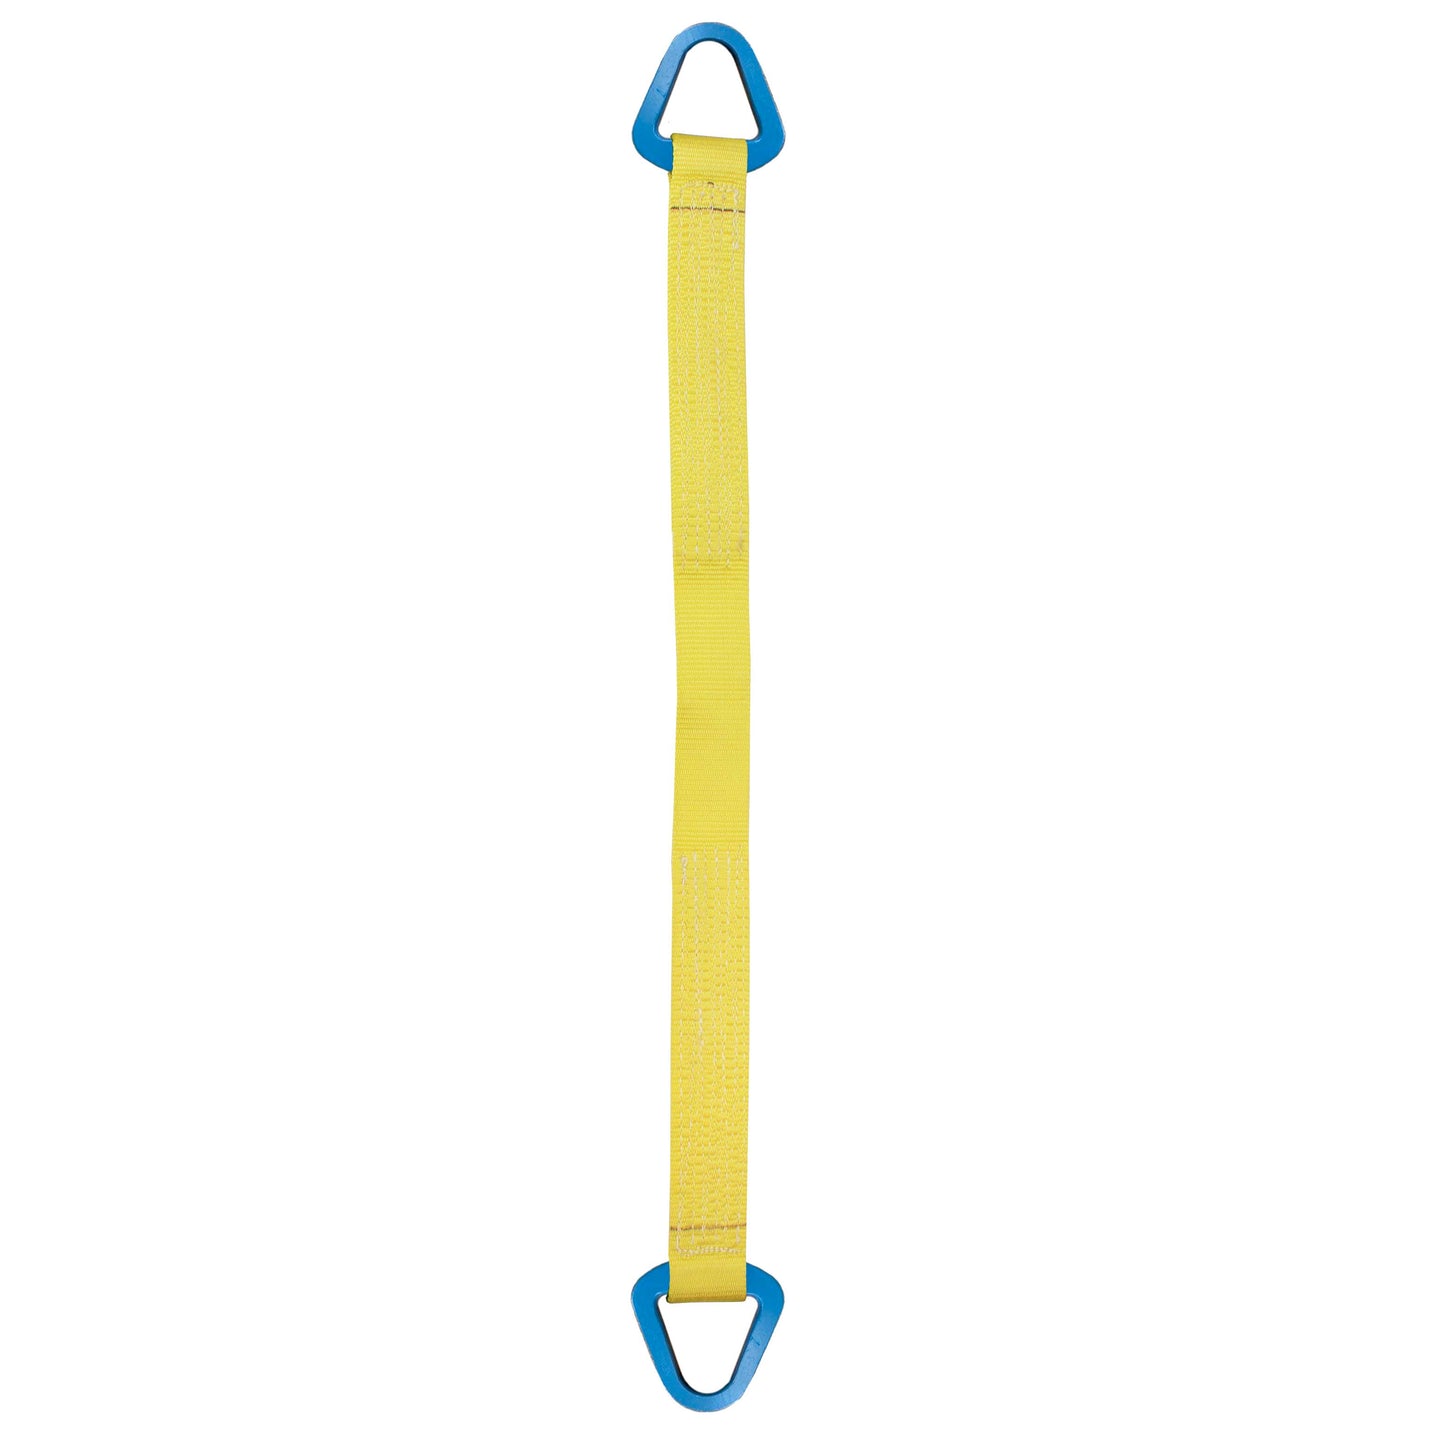 Nylon Lifting Sling Triangle 10 inch x 3 foot 2ply image 1 of 2